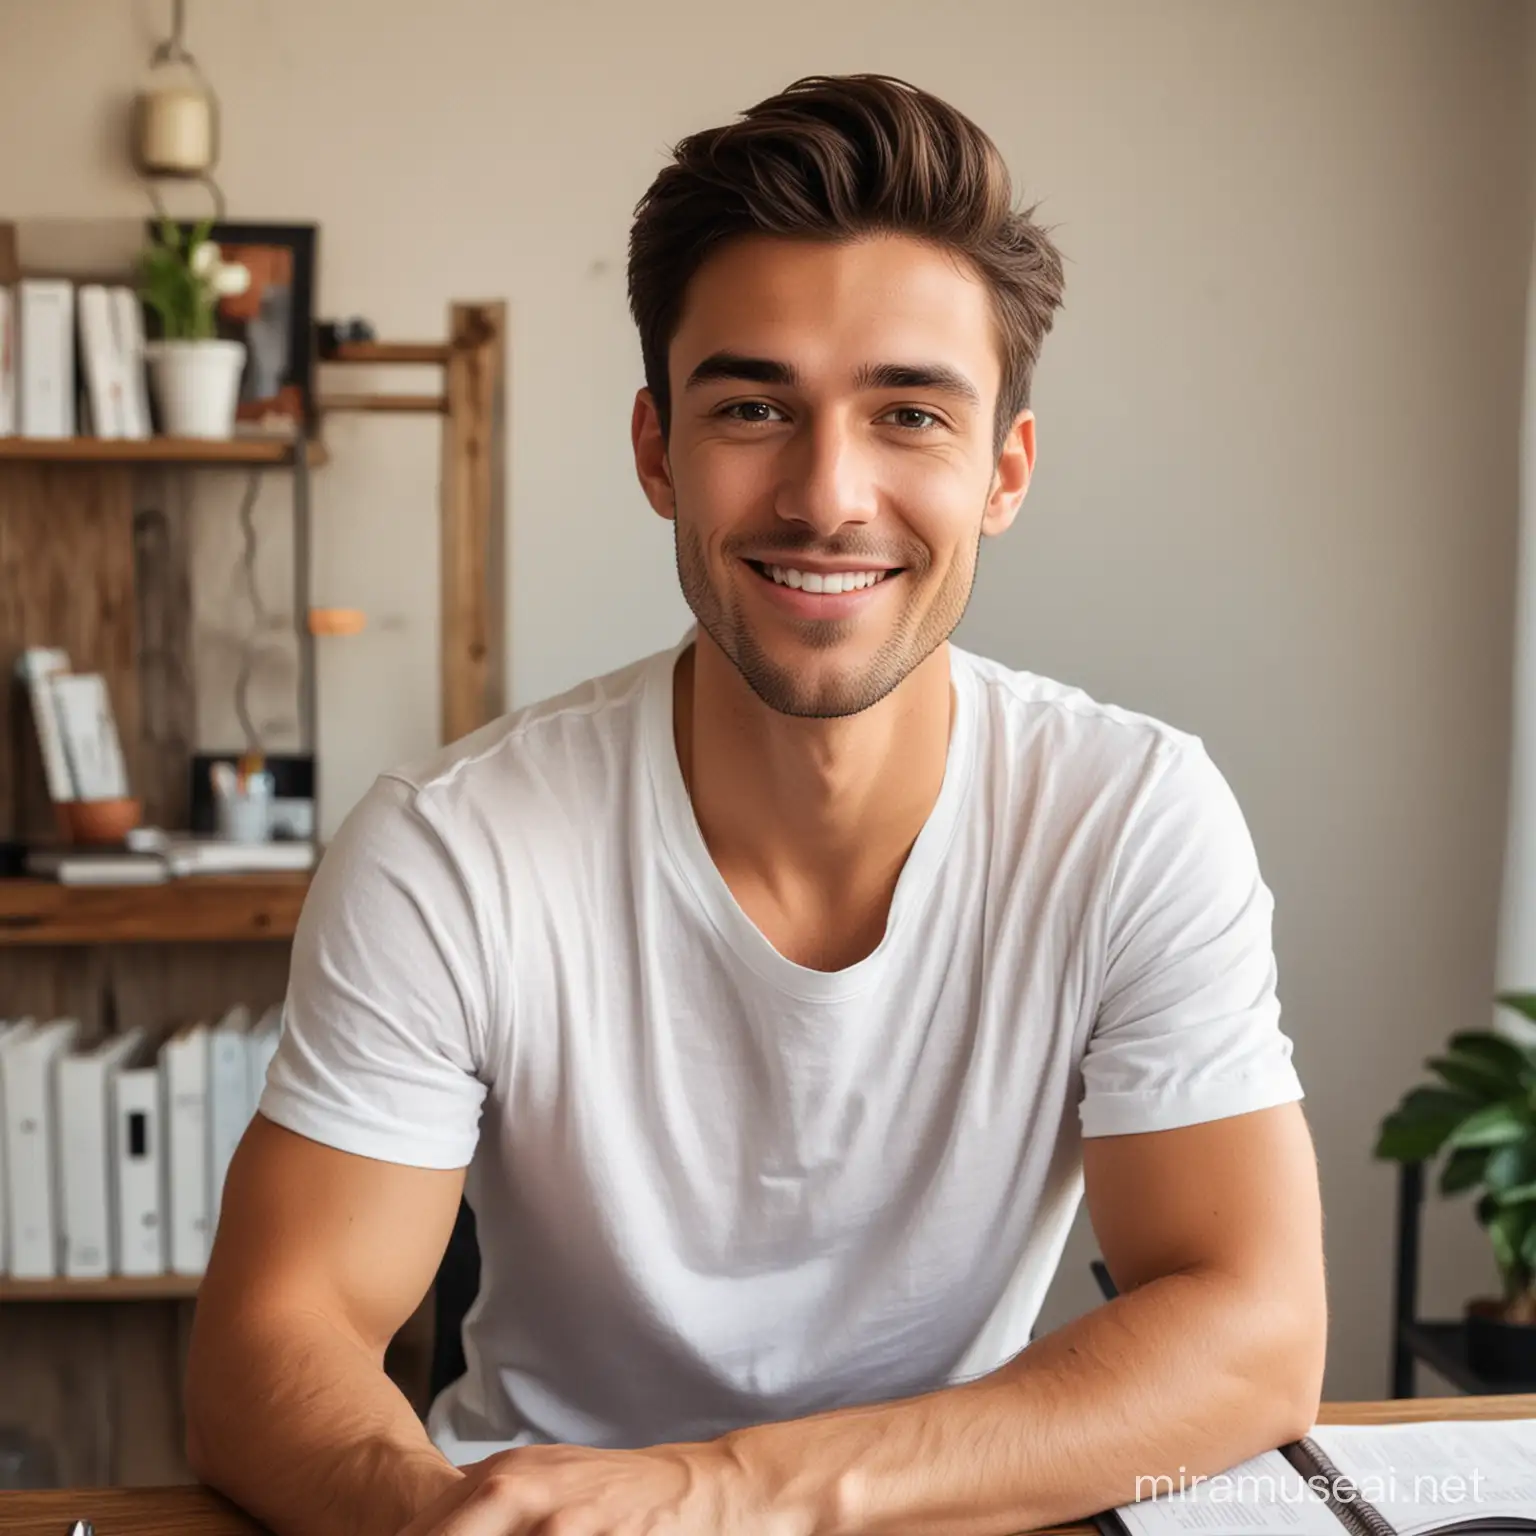 Young Man in Casual Attire Enjoying Conversations in Rustic Office Setting